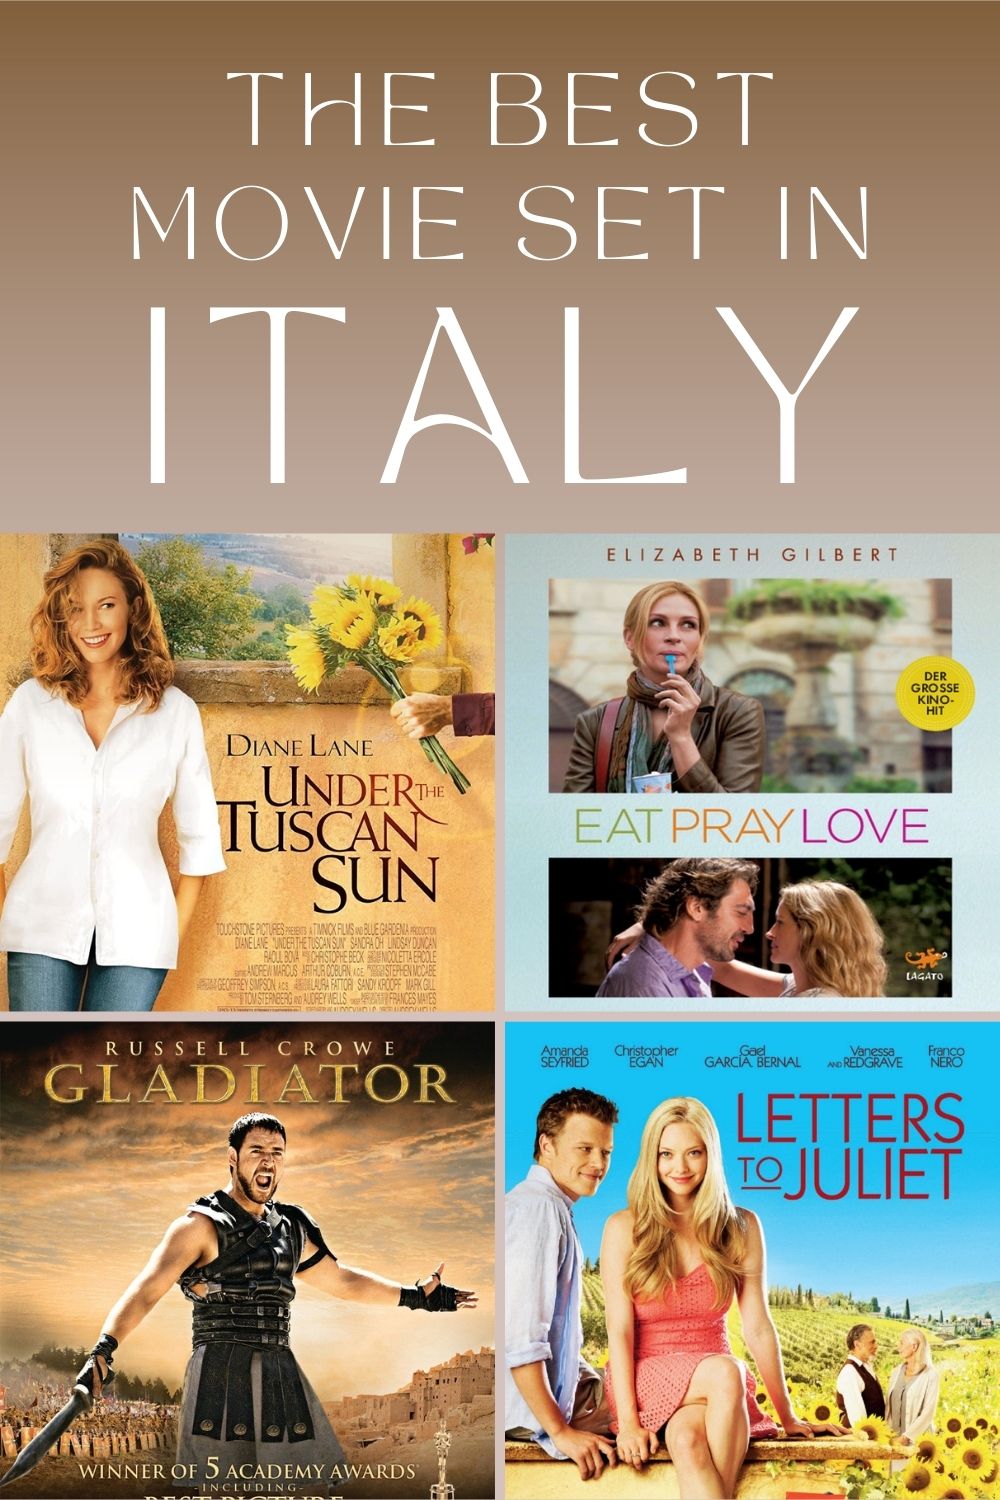 Movies set in Italy